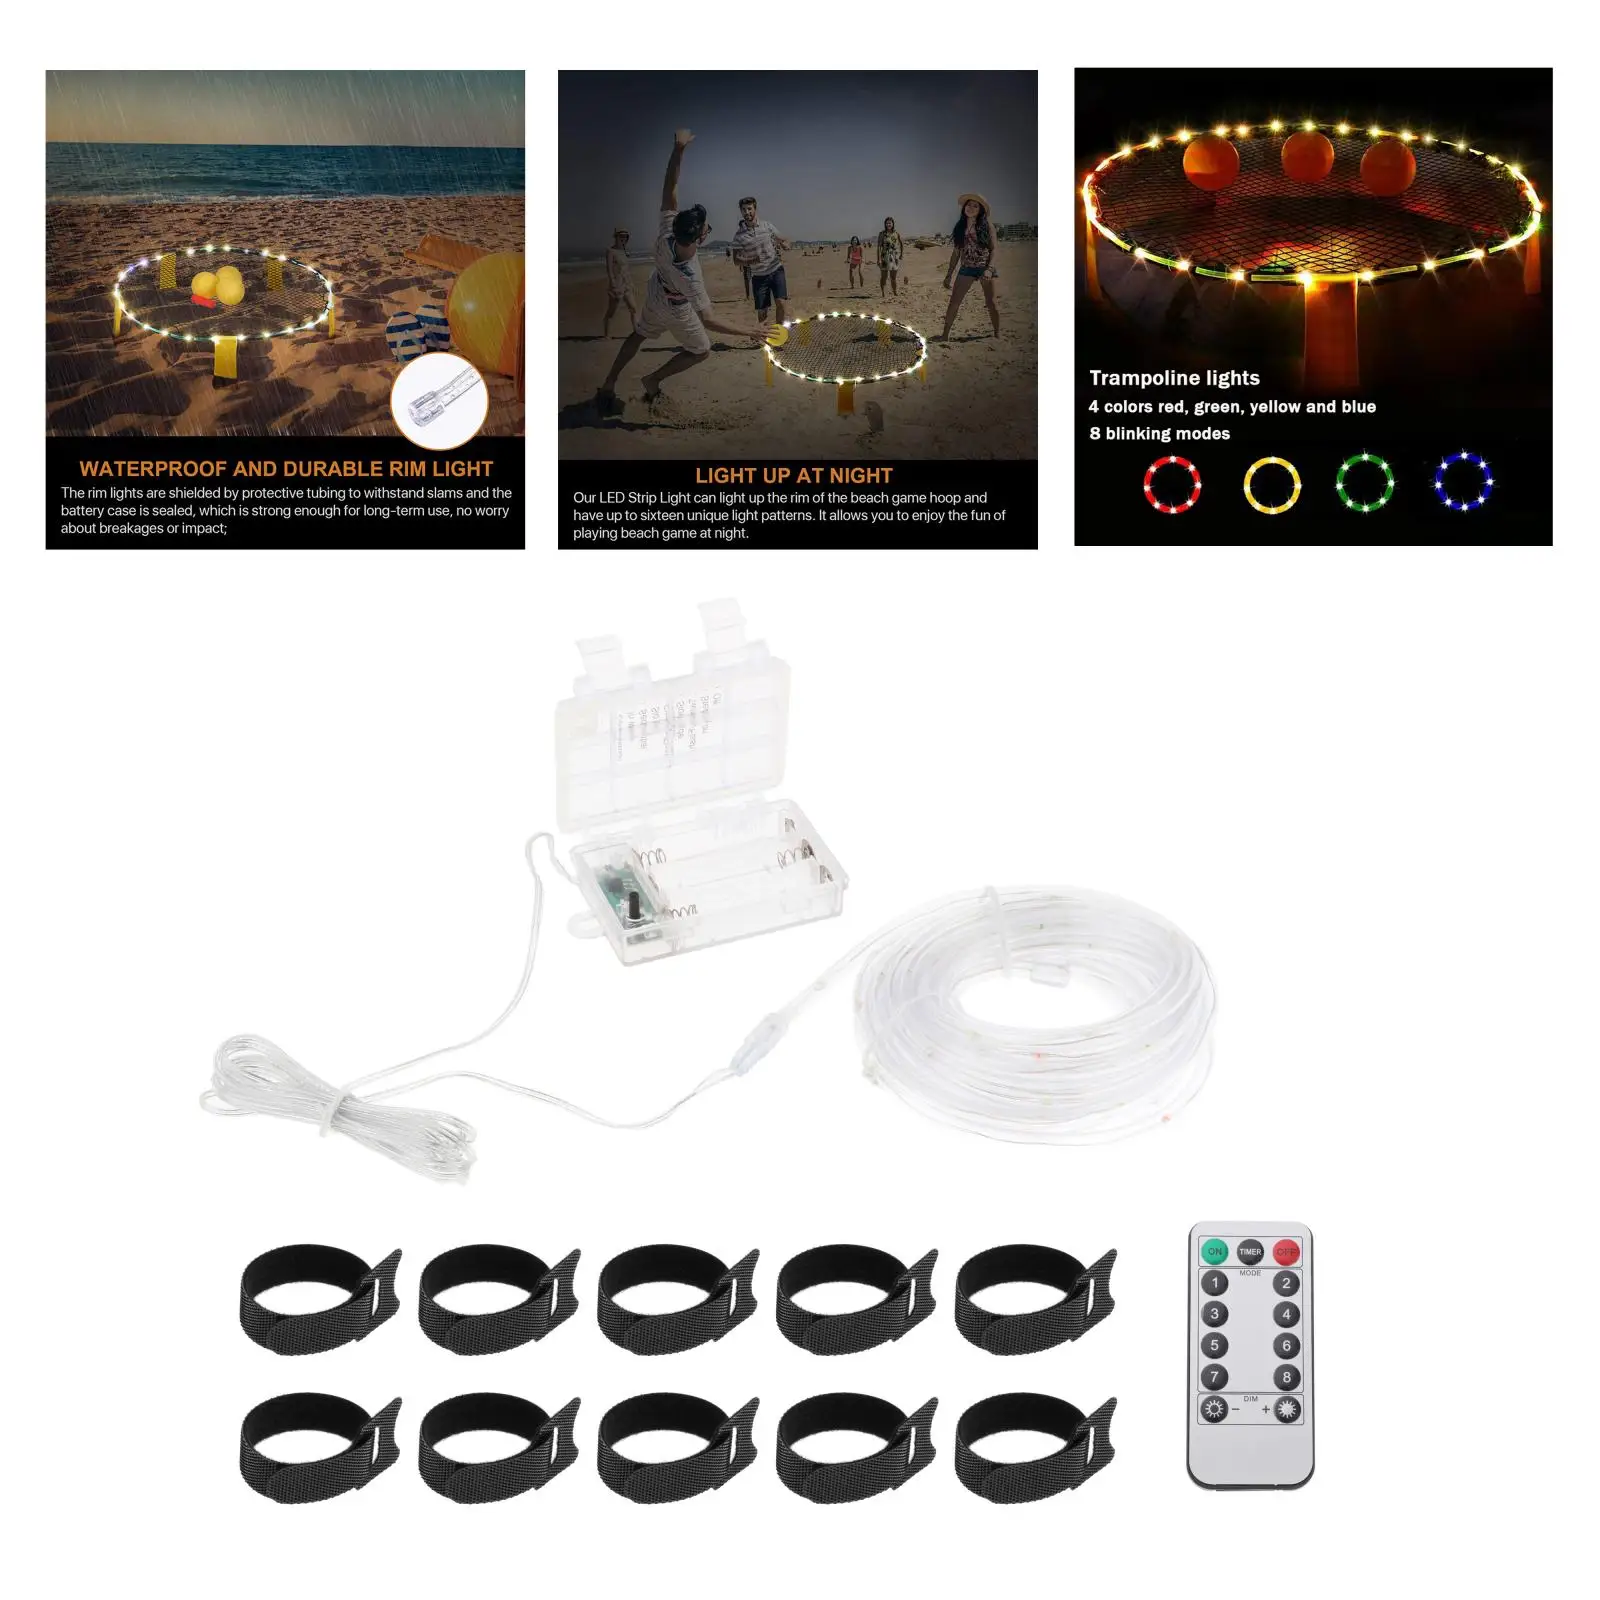 LED Trampoline Lights Rope String Lights Battery Operated Outdoor LED Light